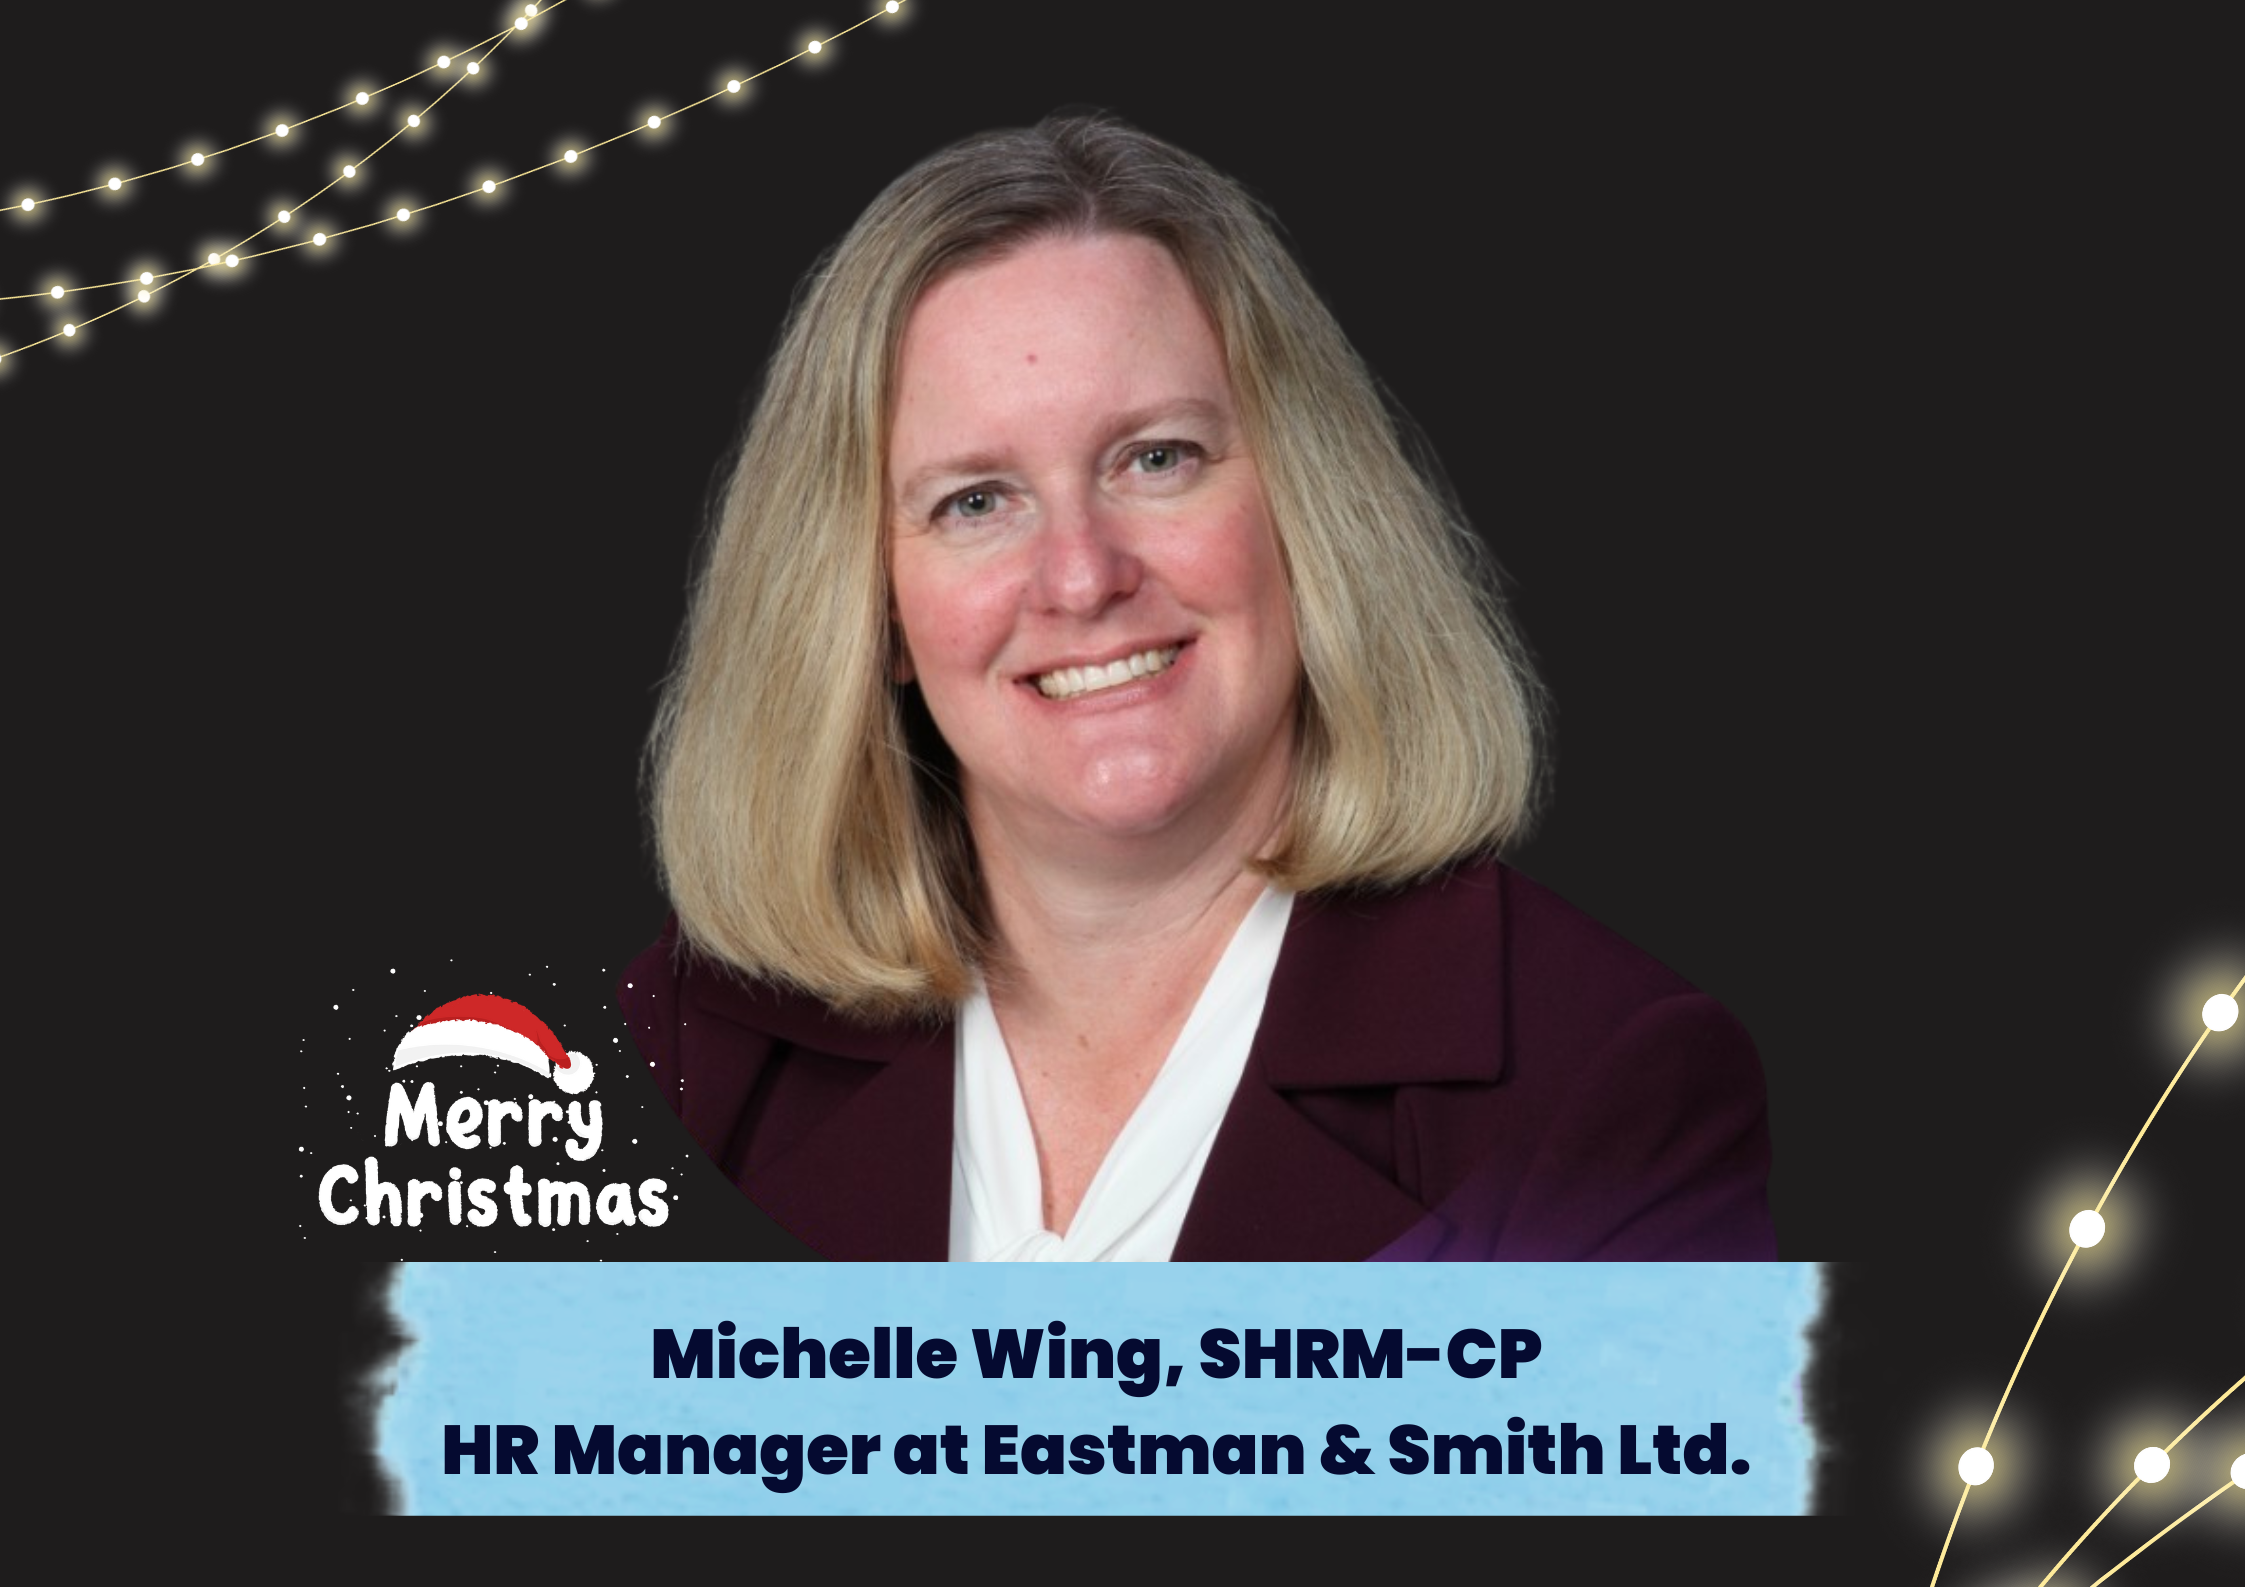 Michelle Wing, SHRM-CP (She/Her)  2nd degree connection2nd HR Manager at Eastman & Smith Ltd.